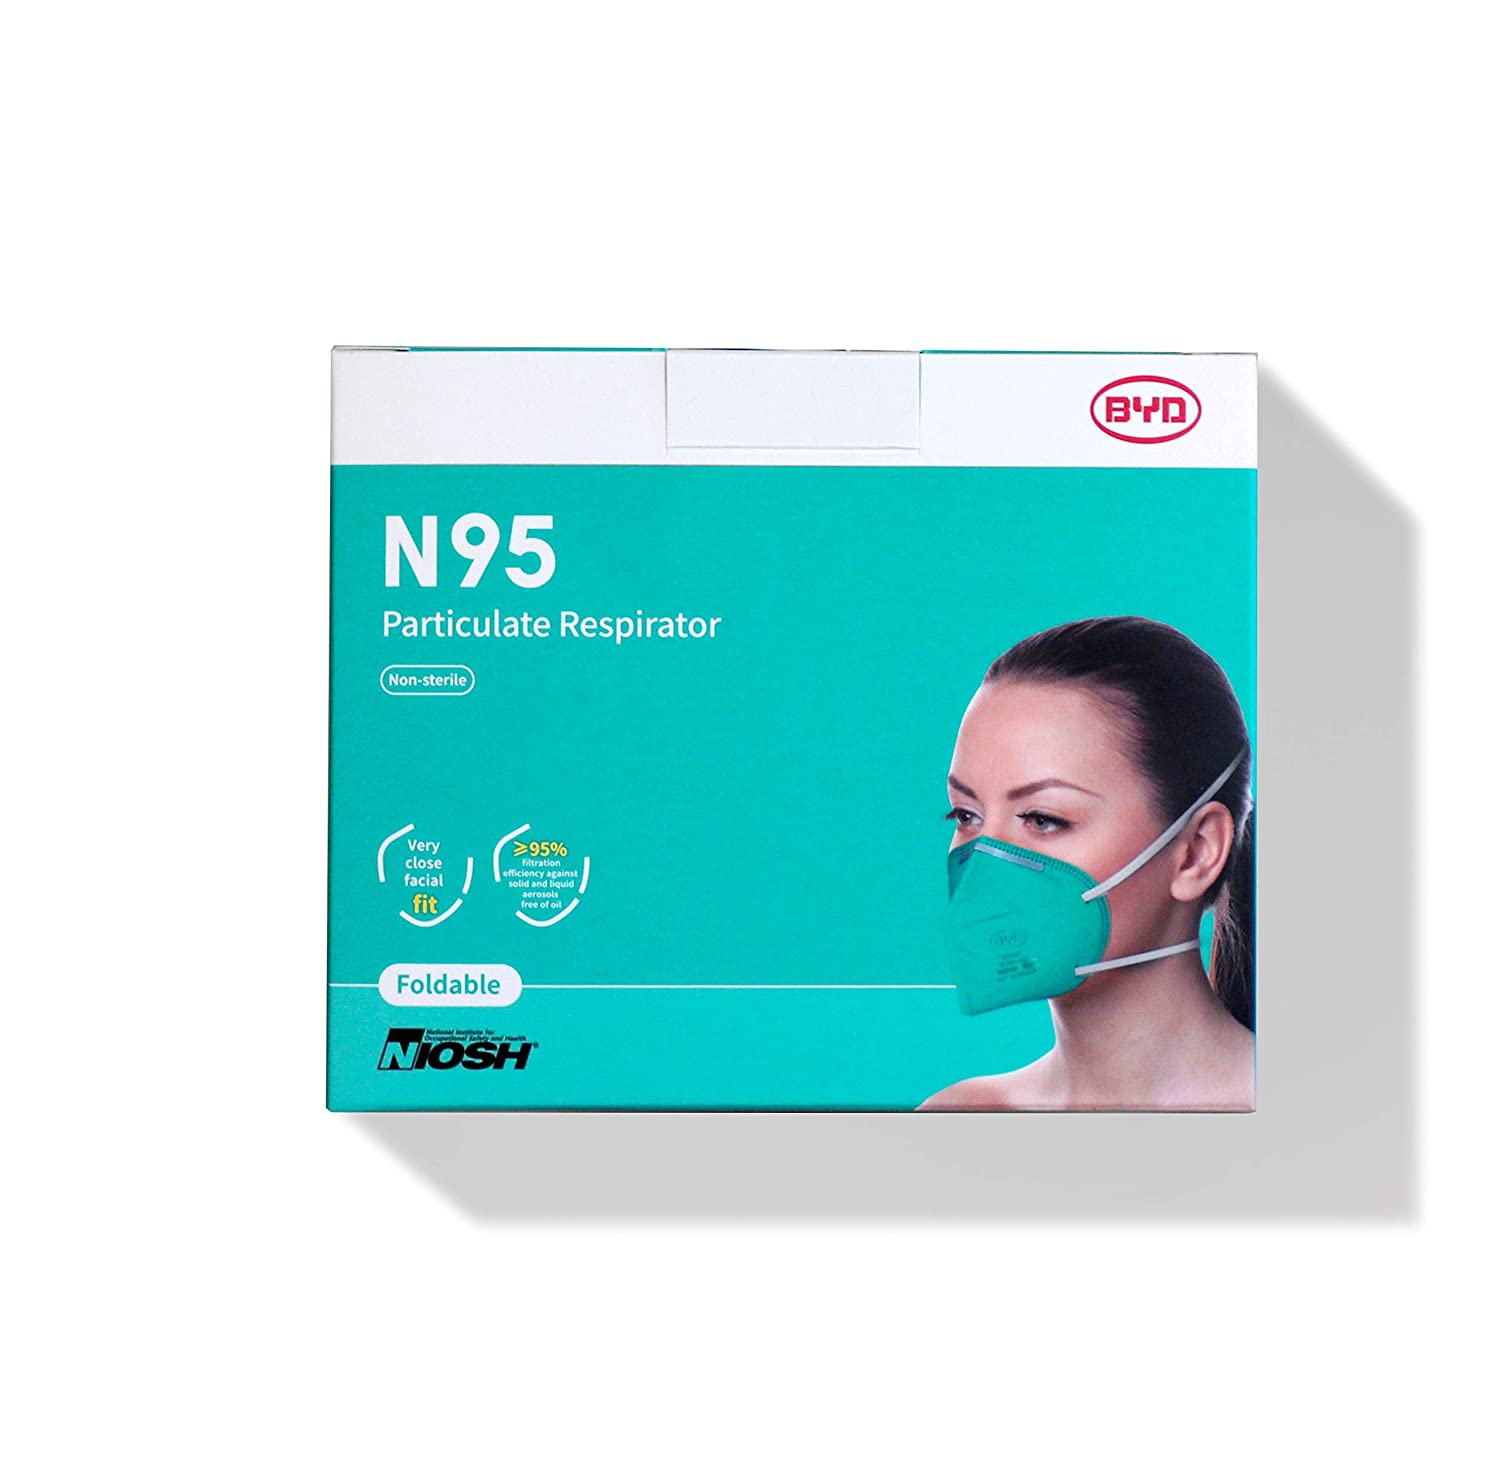 BYD N95 Particulate Respirator (20 Pack)